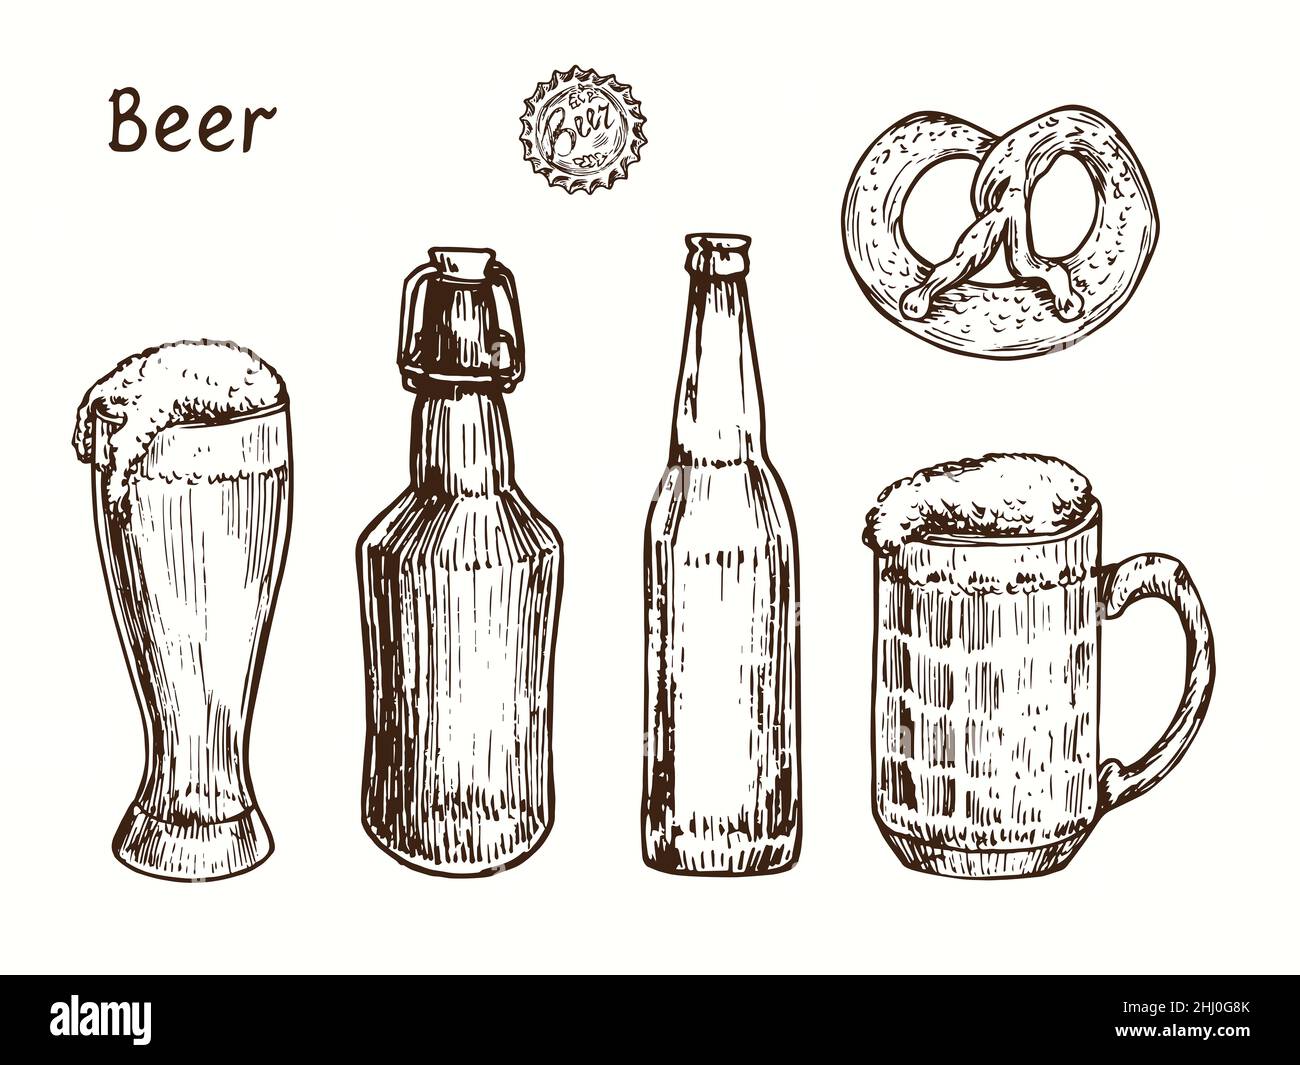 Beer bottles, glass, mug and pretzel. Ink black and white doodle drawing in woodcut style. Stock Photo